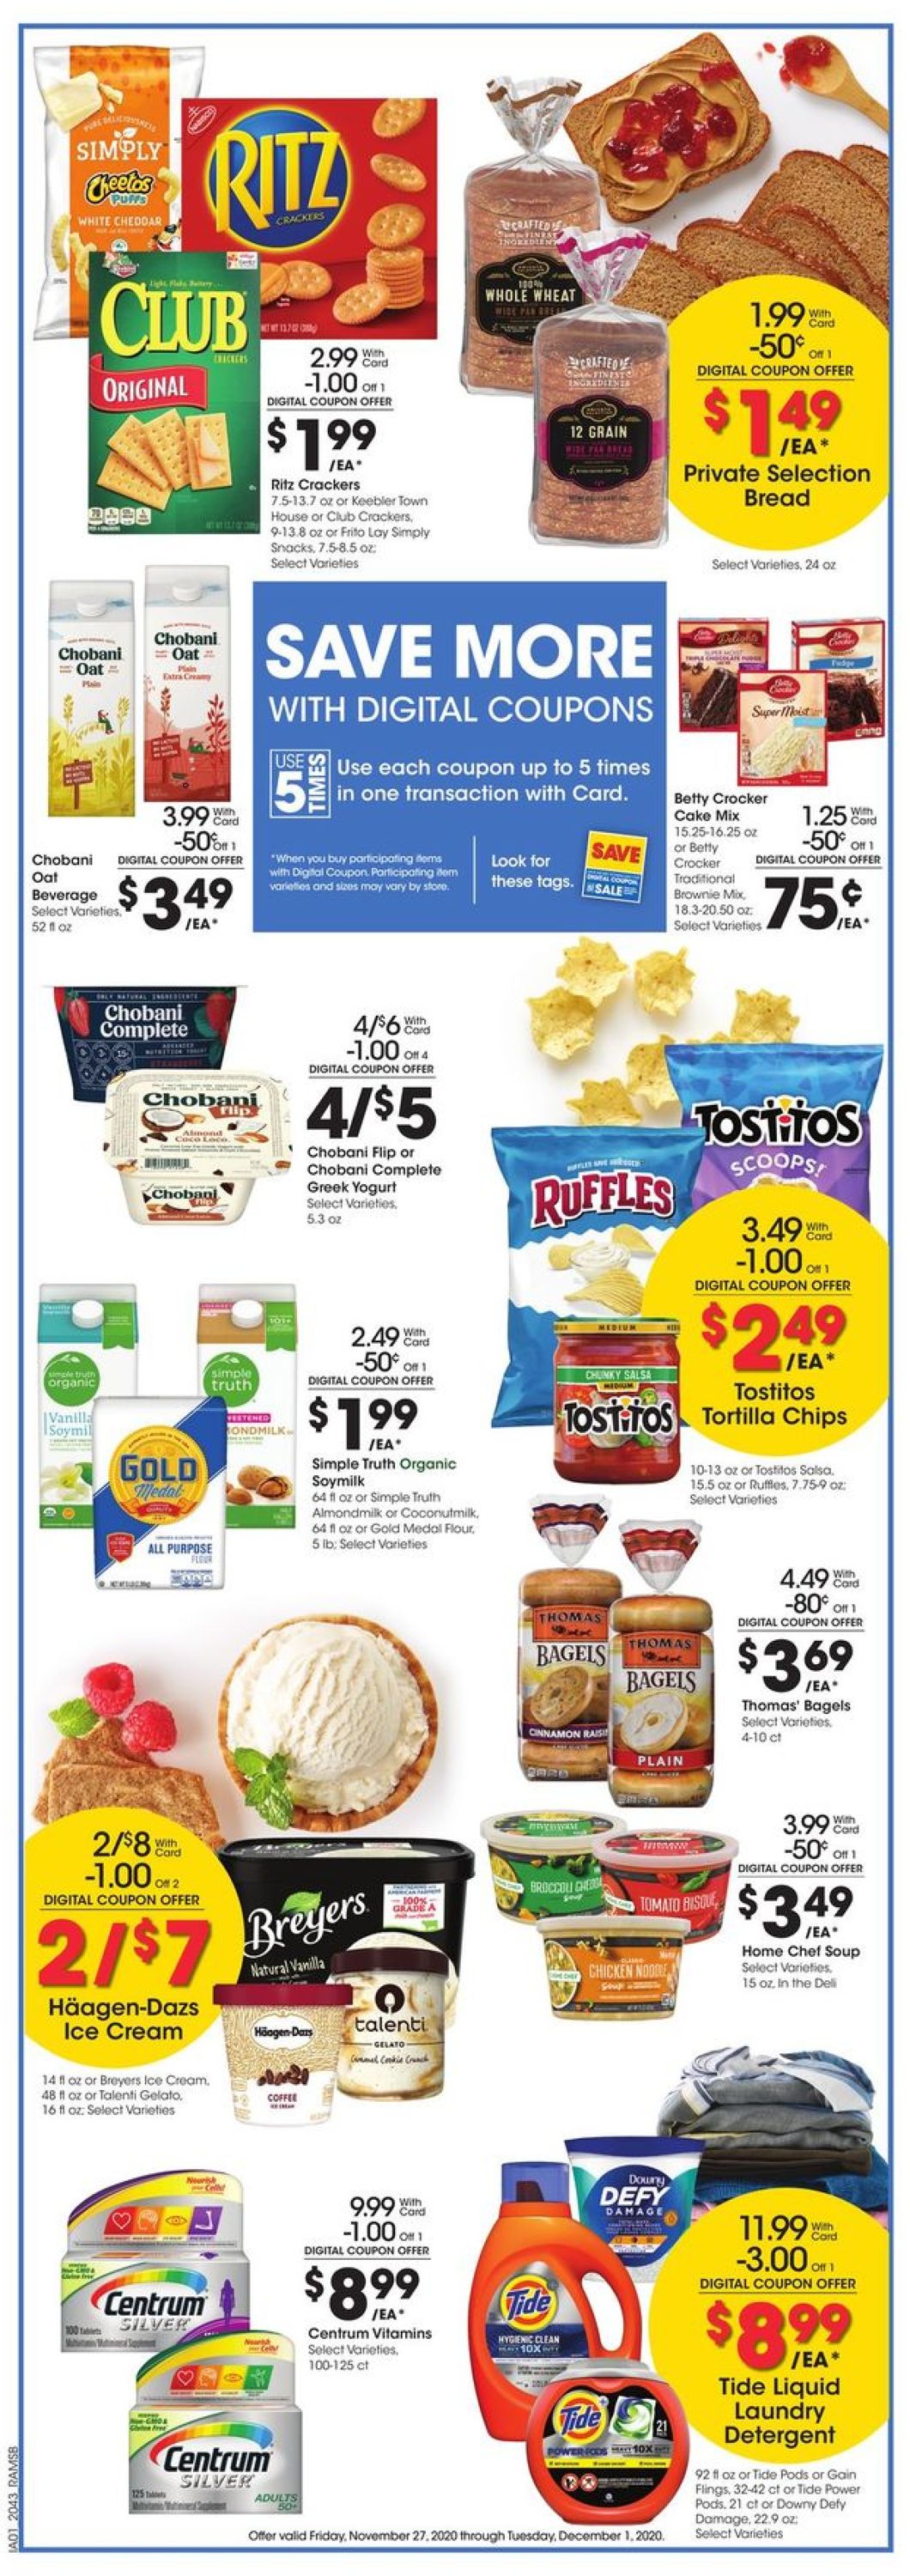 Ralphs Ad from 11/27/2020